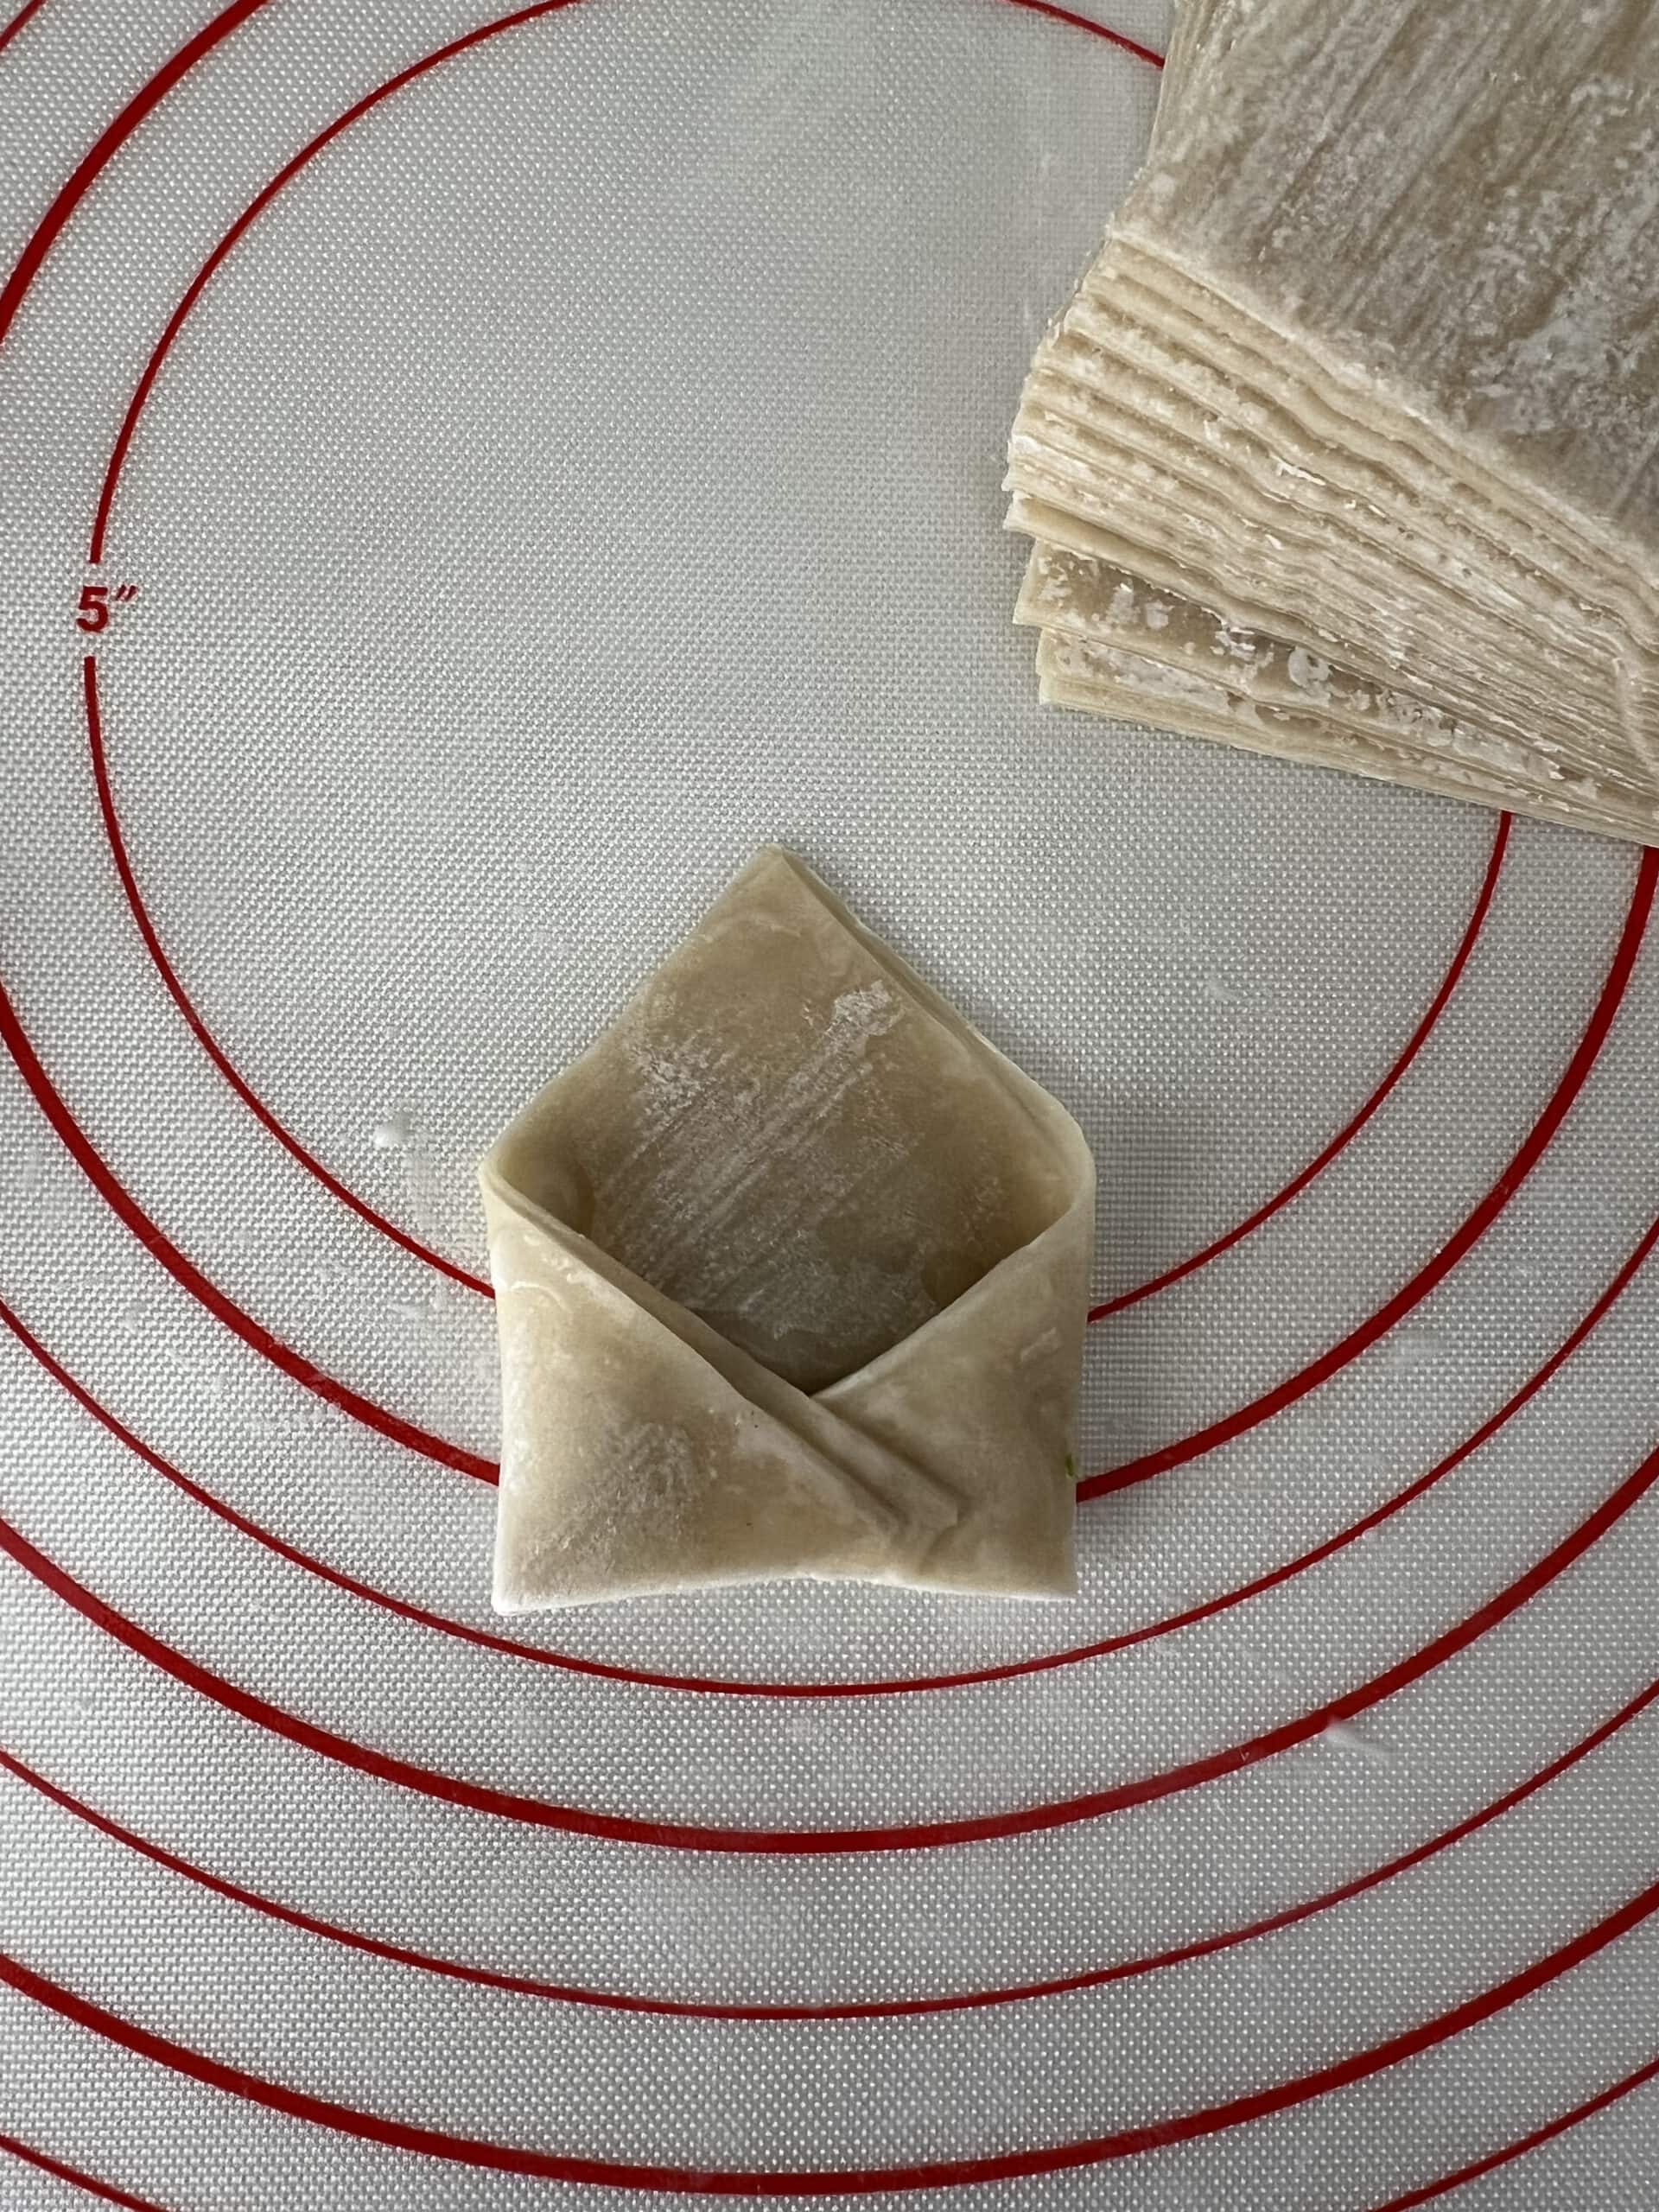 A wonton wrapper folded and ready to be fried.